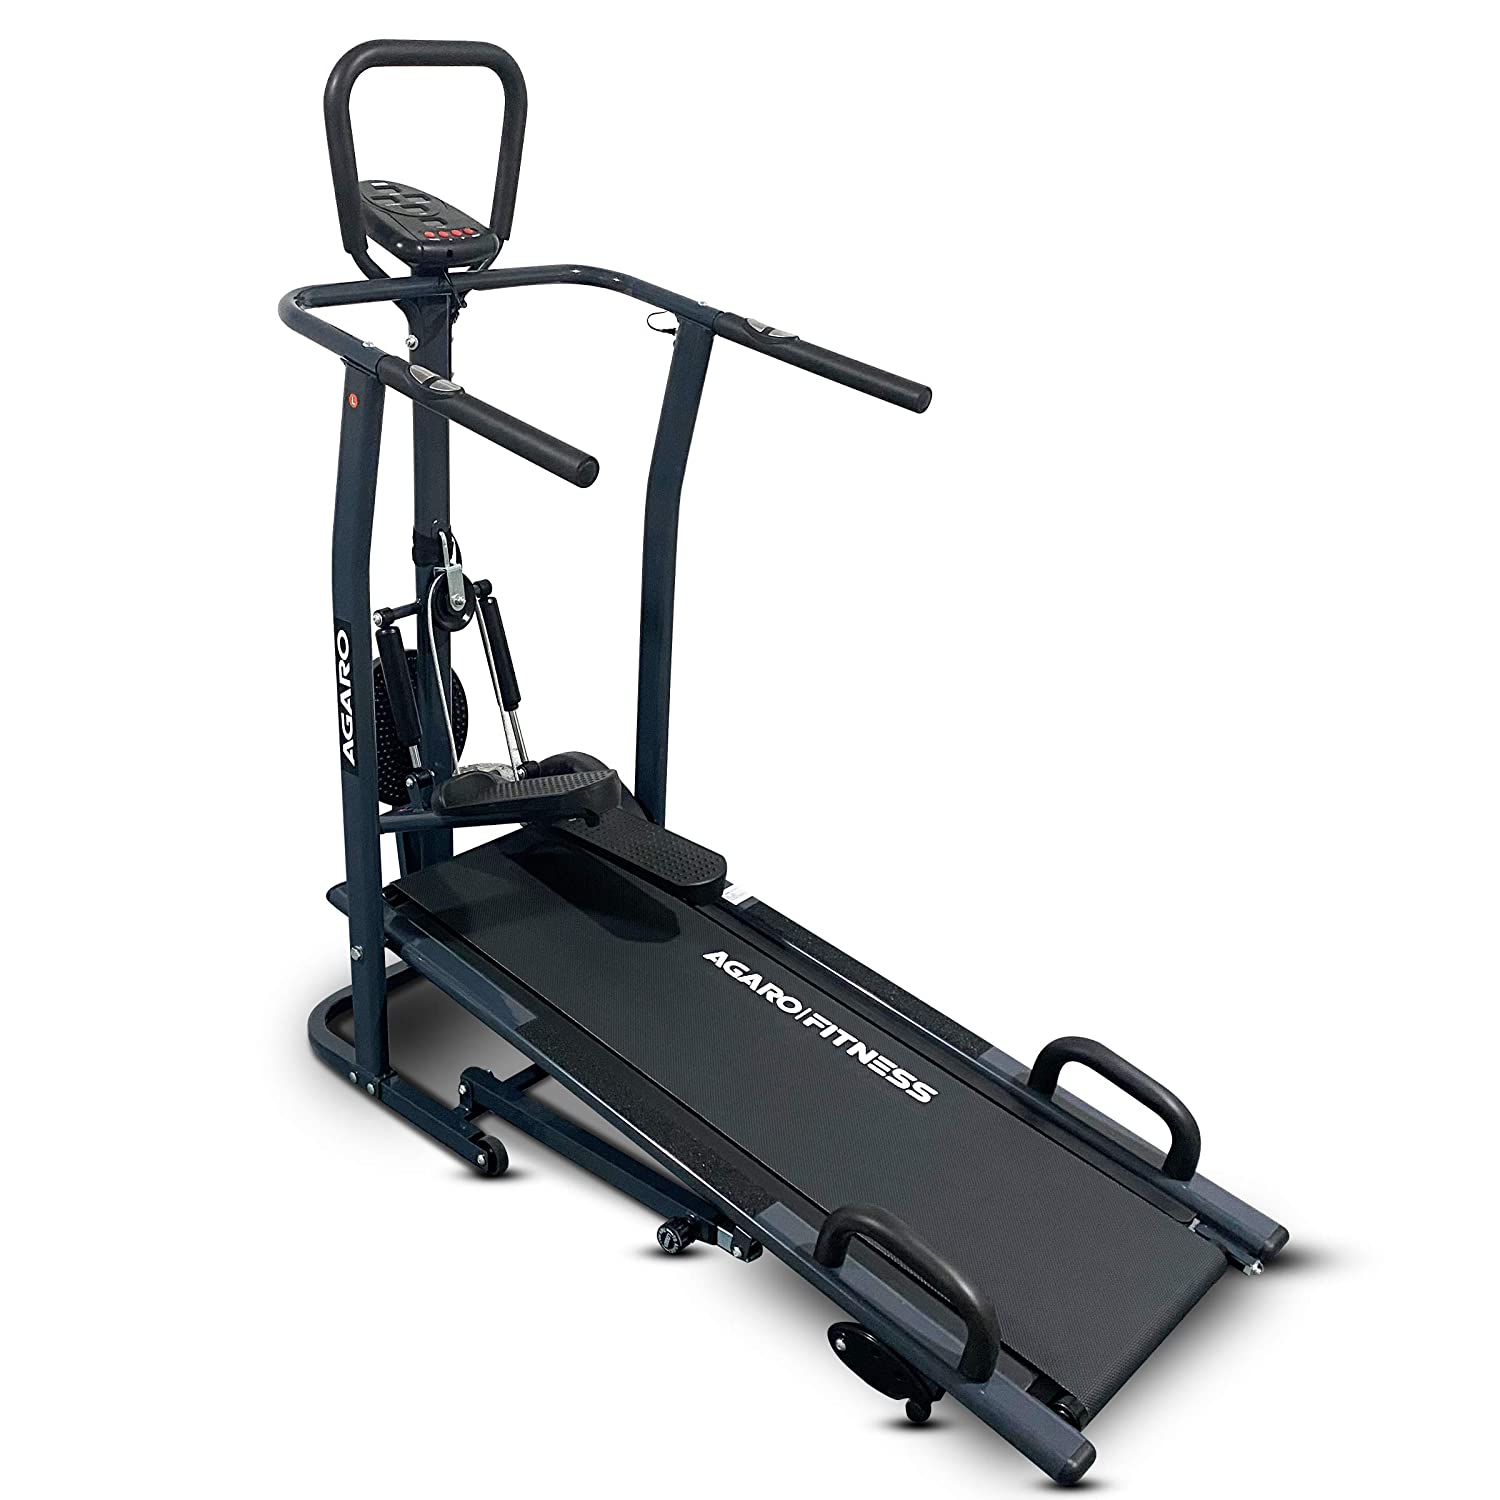 An affordable manual treadmill for home use in India